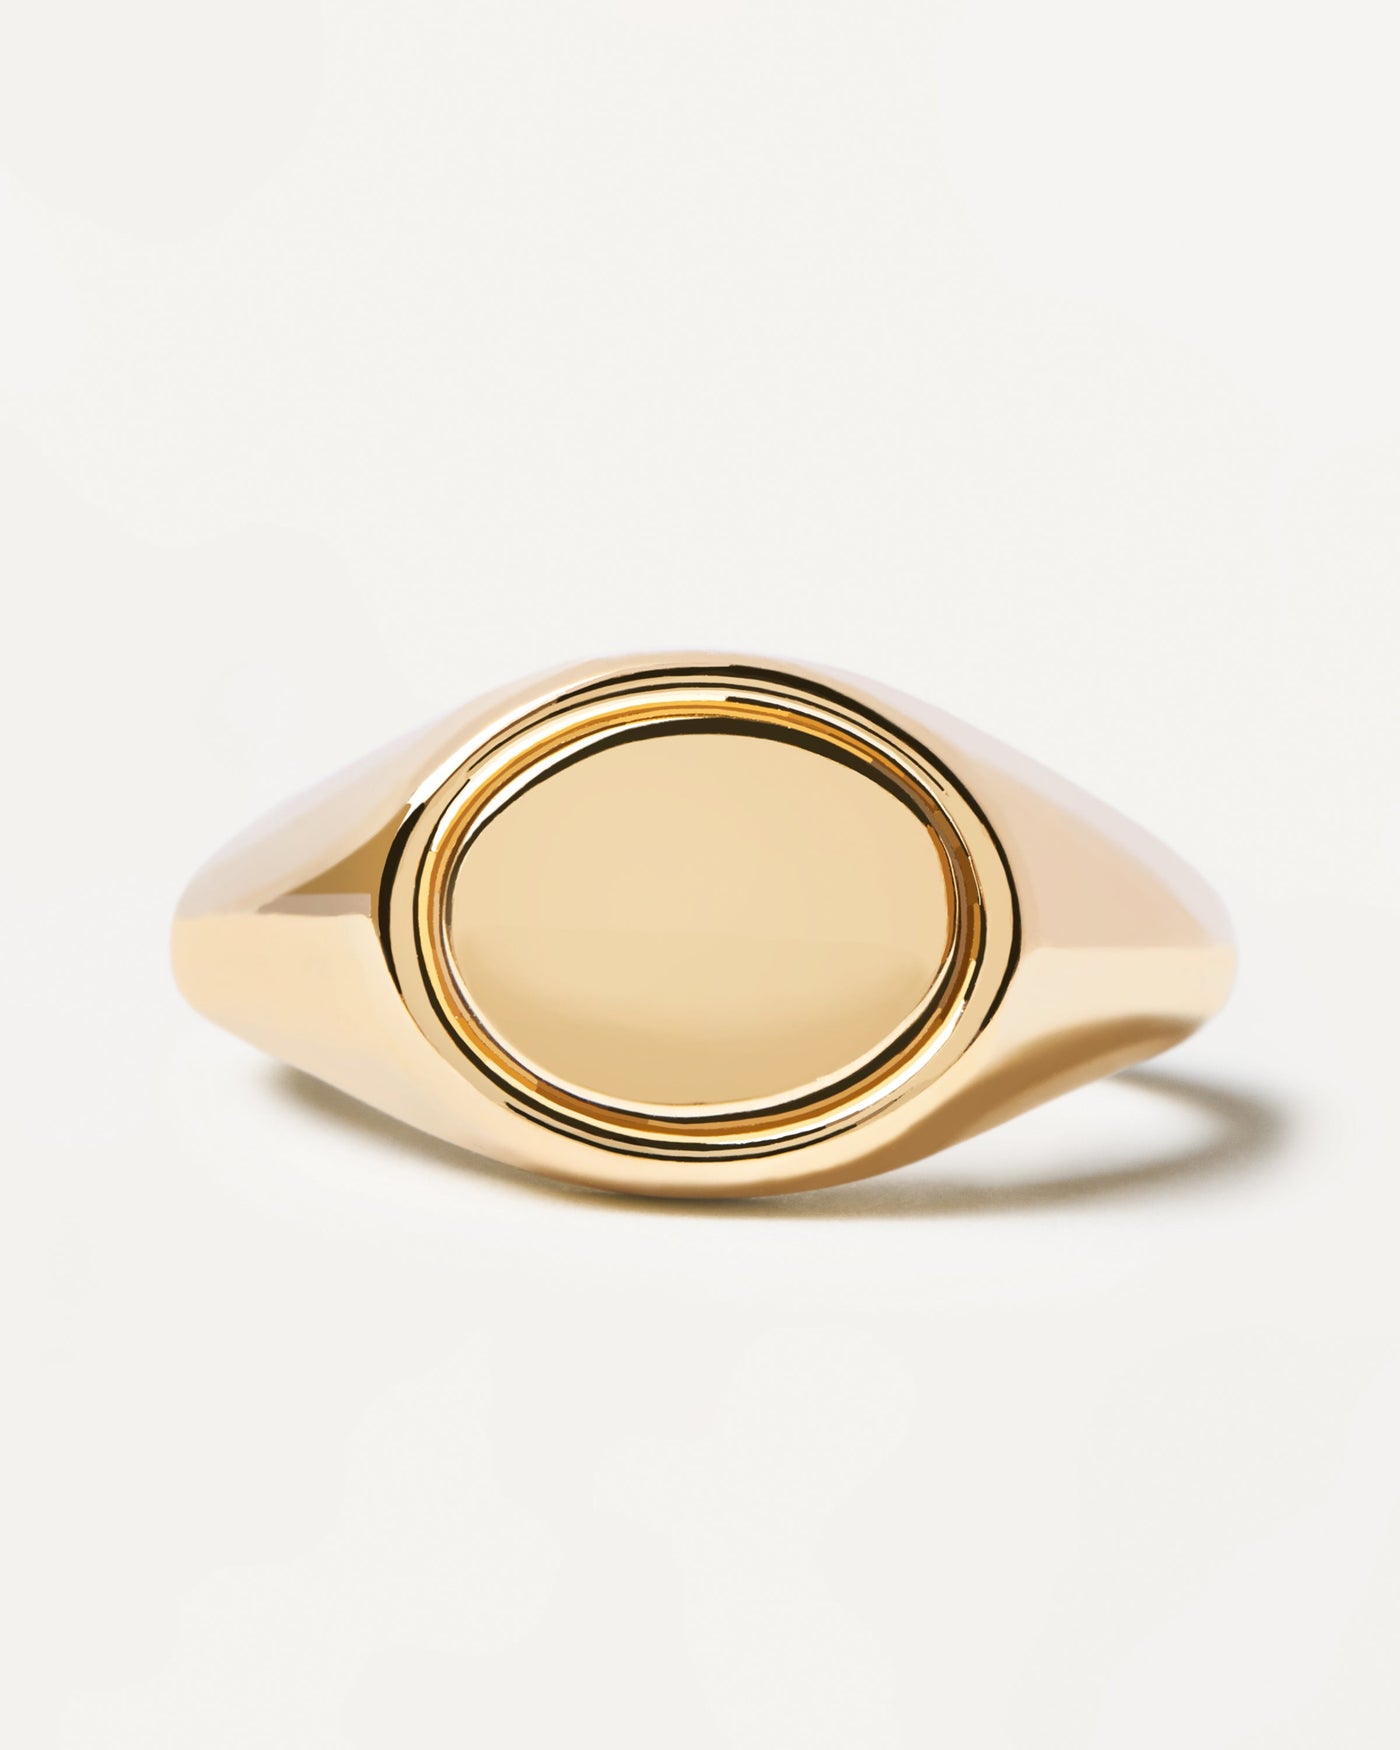 2023 Selection | Stamp Ring. Engravable oval shape signet ring in gold-plated. Get the latest arrival from PDPAOLA. Place your order safely and get this Best Seller. Free Shipping.